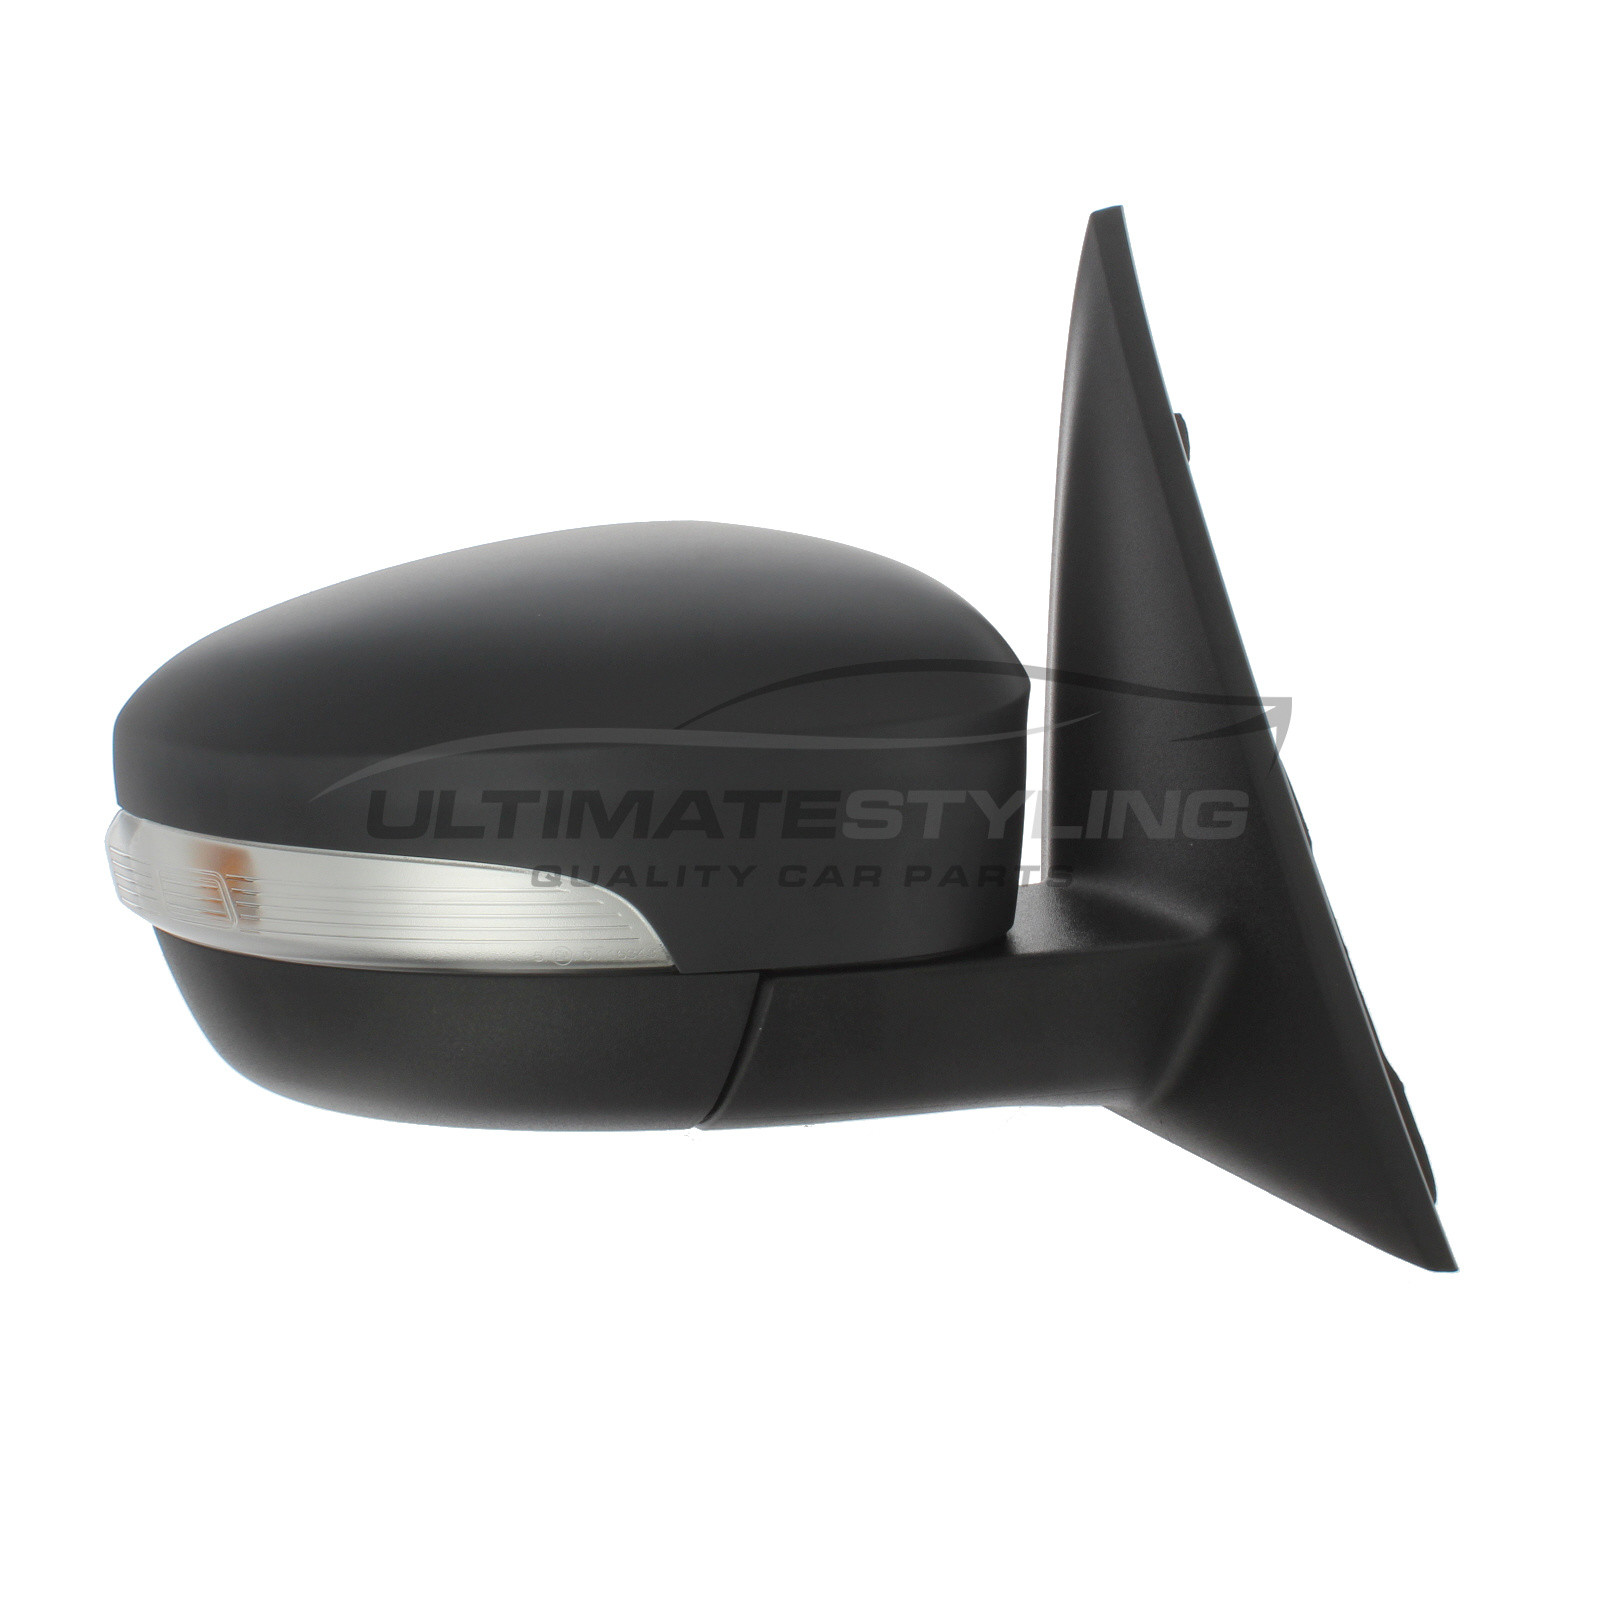 Ford Galaxy / S-MAX Wing Mirror / Door Mirror - Drivers Side (RH) - Electric adjustment - Heated Glass - Power Folding - Indicator - Puddle Light - Primed